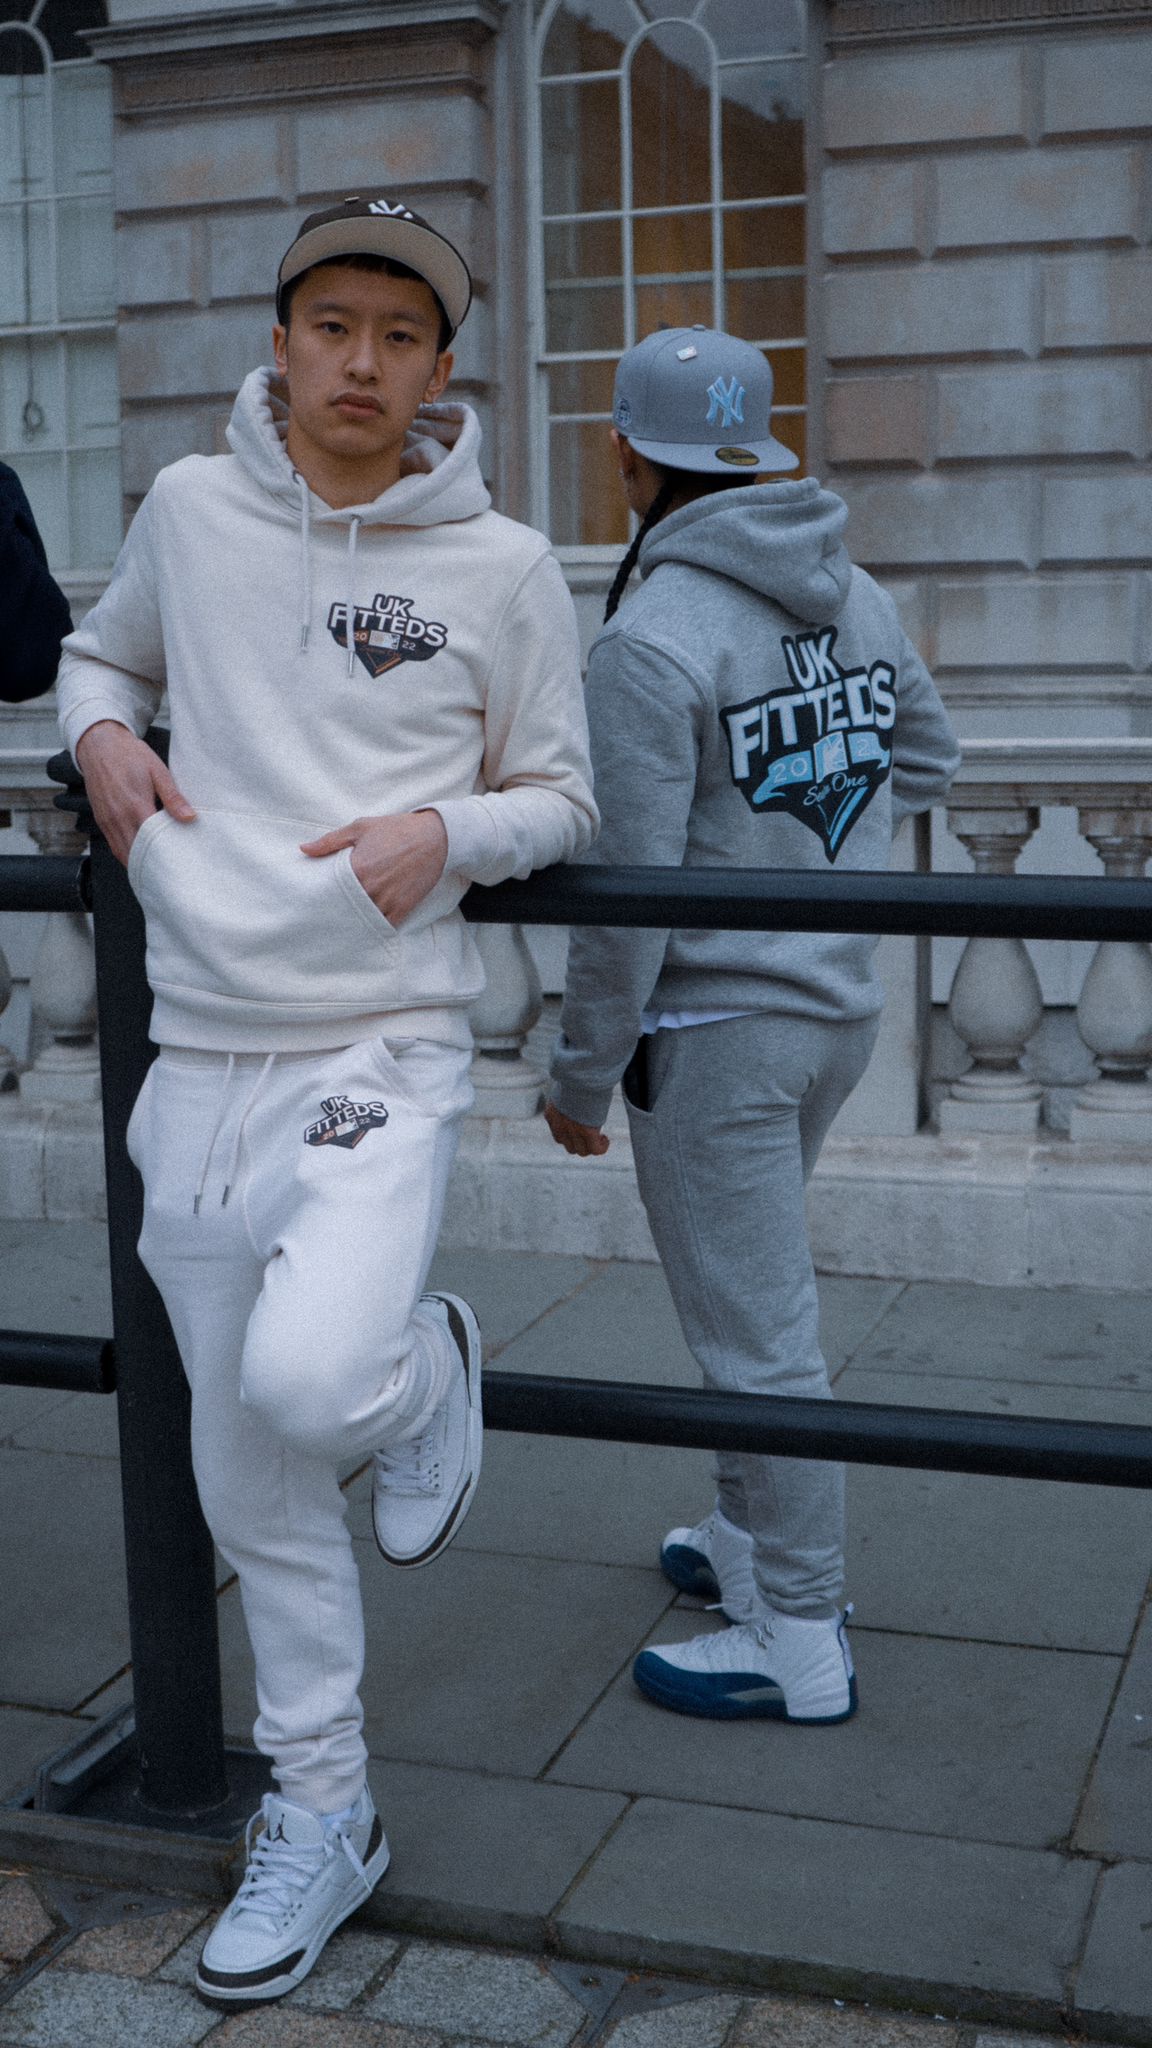 UKFitteds S1 Tracksuit Full Set Cream/Brown Colourway